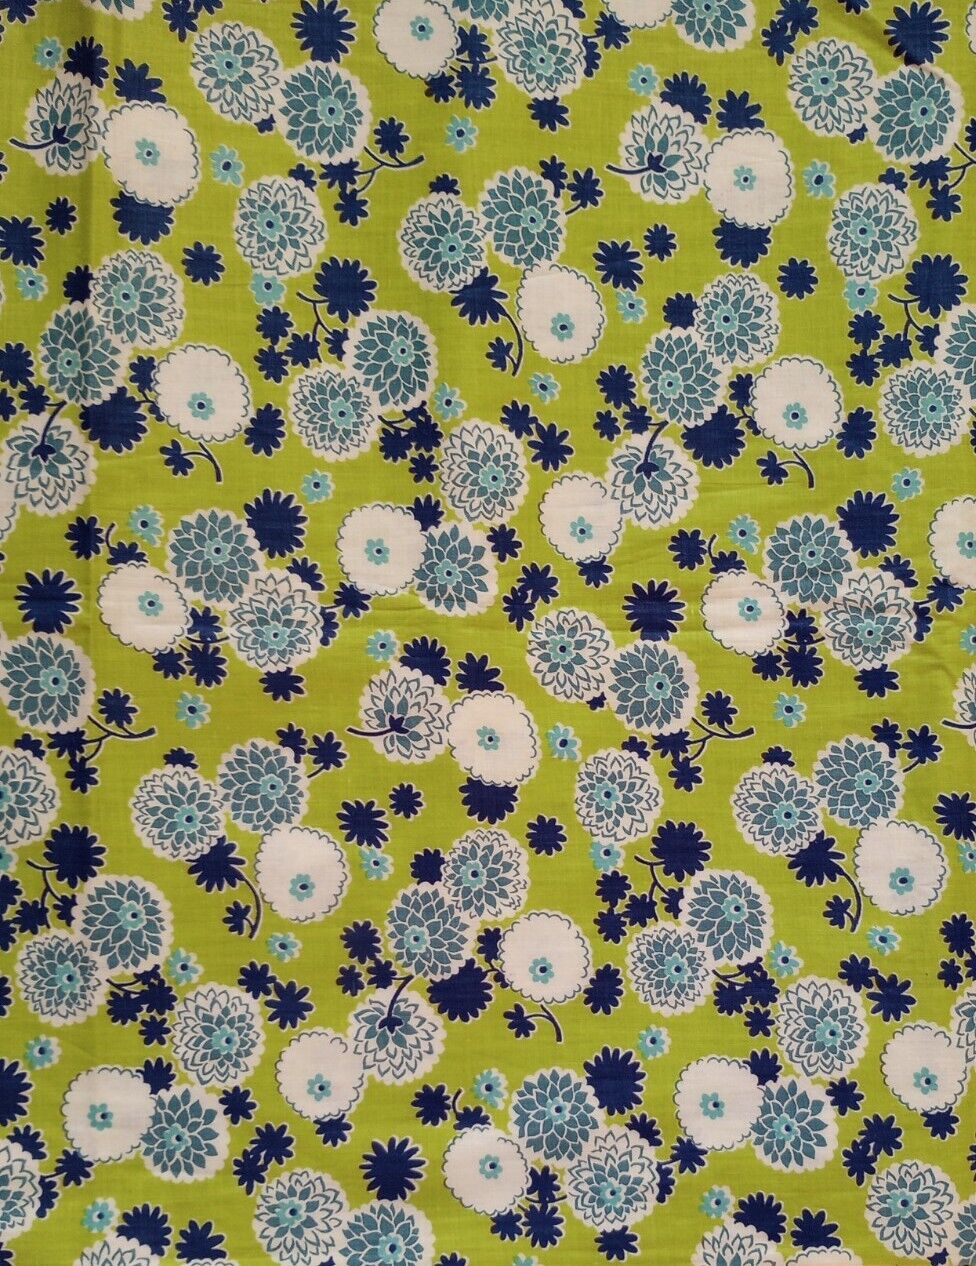 VTG 30s 40s FABRIC 34 Wide White Blue Flowers Green Quilting Dress Fabric BHTY